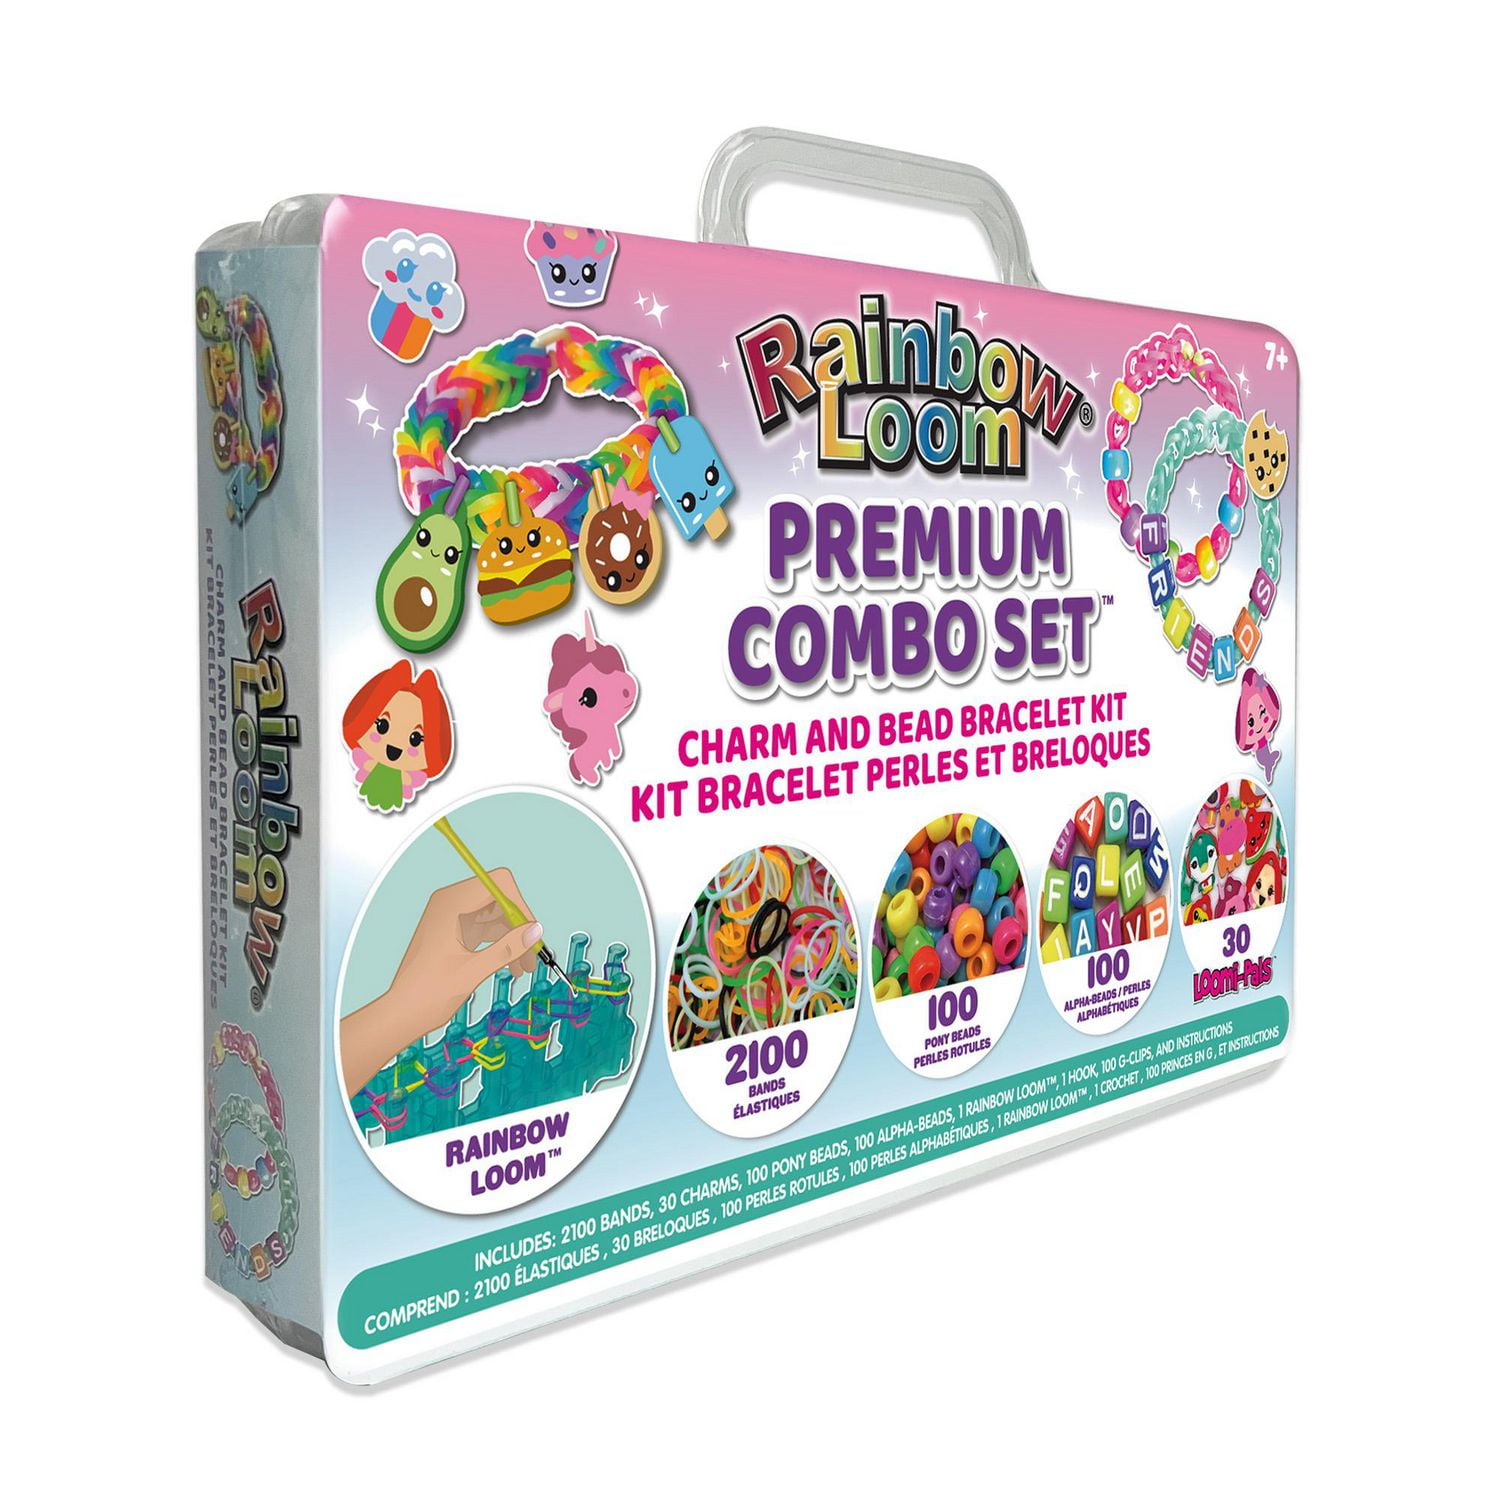 Rainbow Loom Premium Combo Set, Includes 230 Beads and Charms